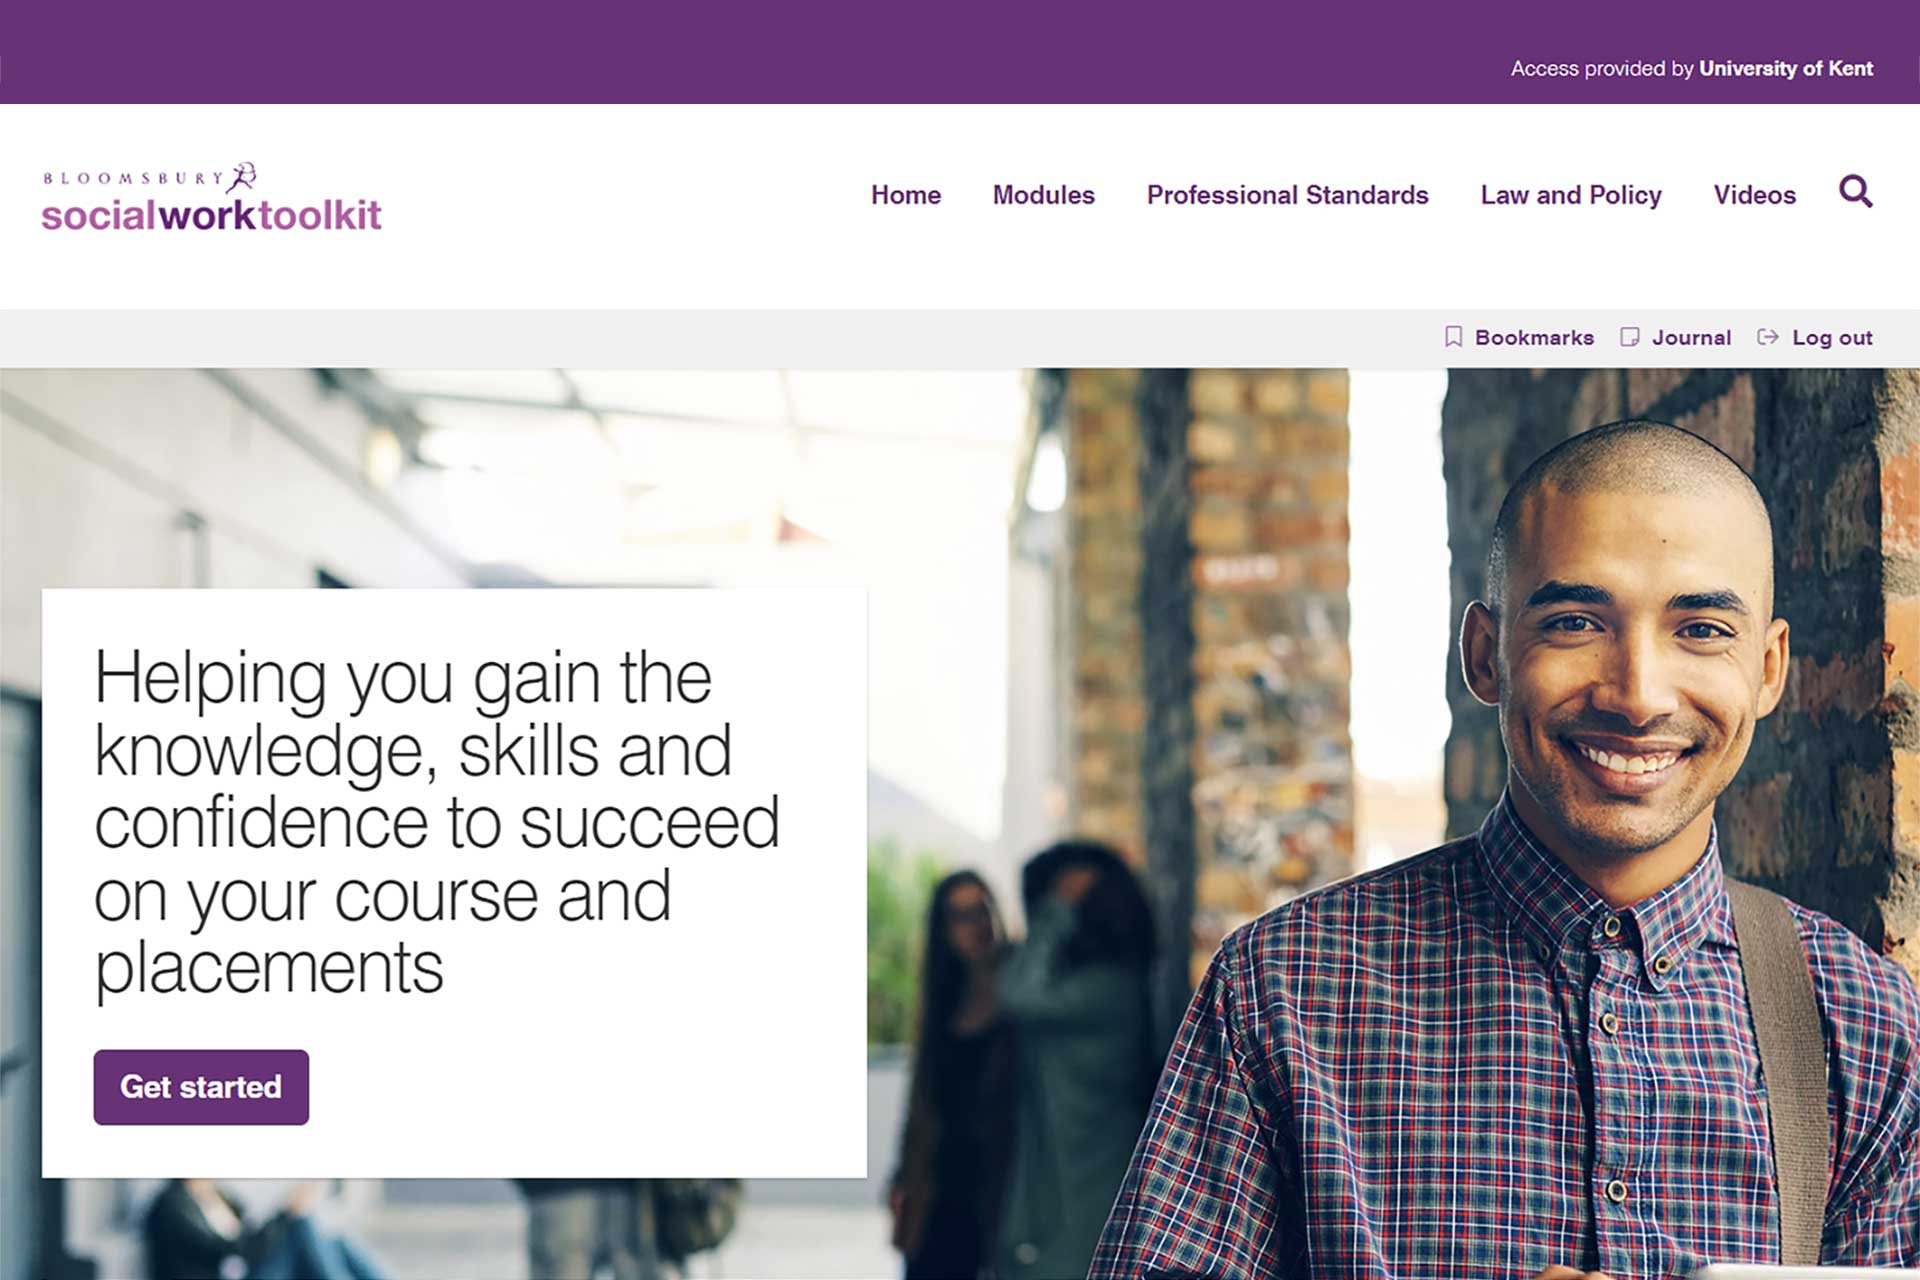 Image taken from the Bloomsbury Social work Toolkit website shows a smiling male student. There is a text box that says 'Helping you gain the knowledge, skills and confidence to succeed on your course and placements.